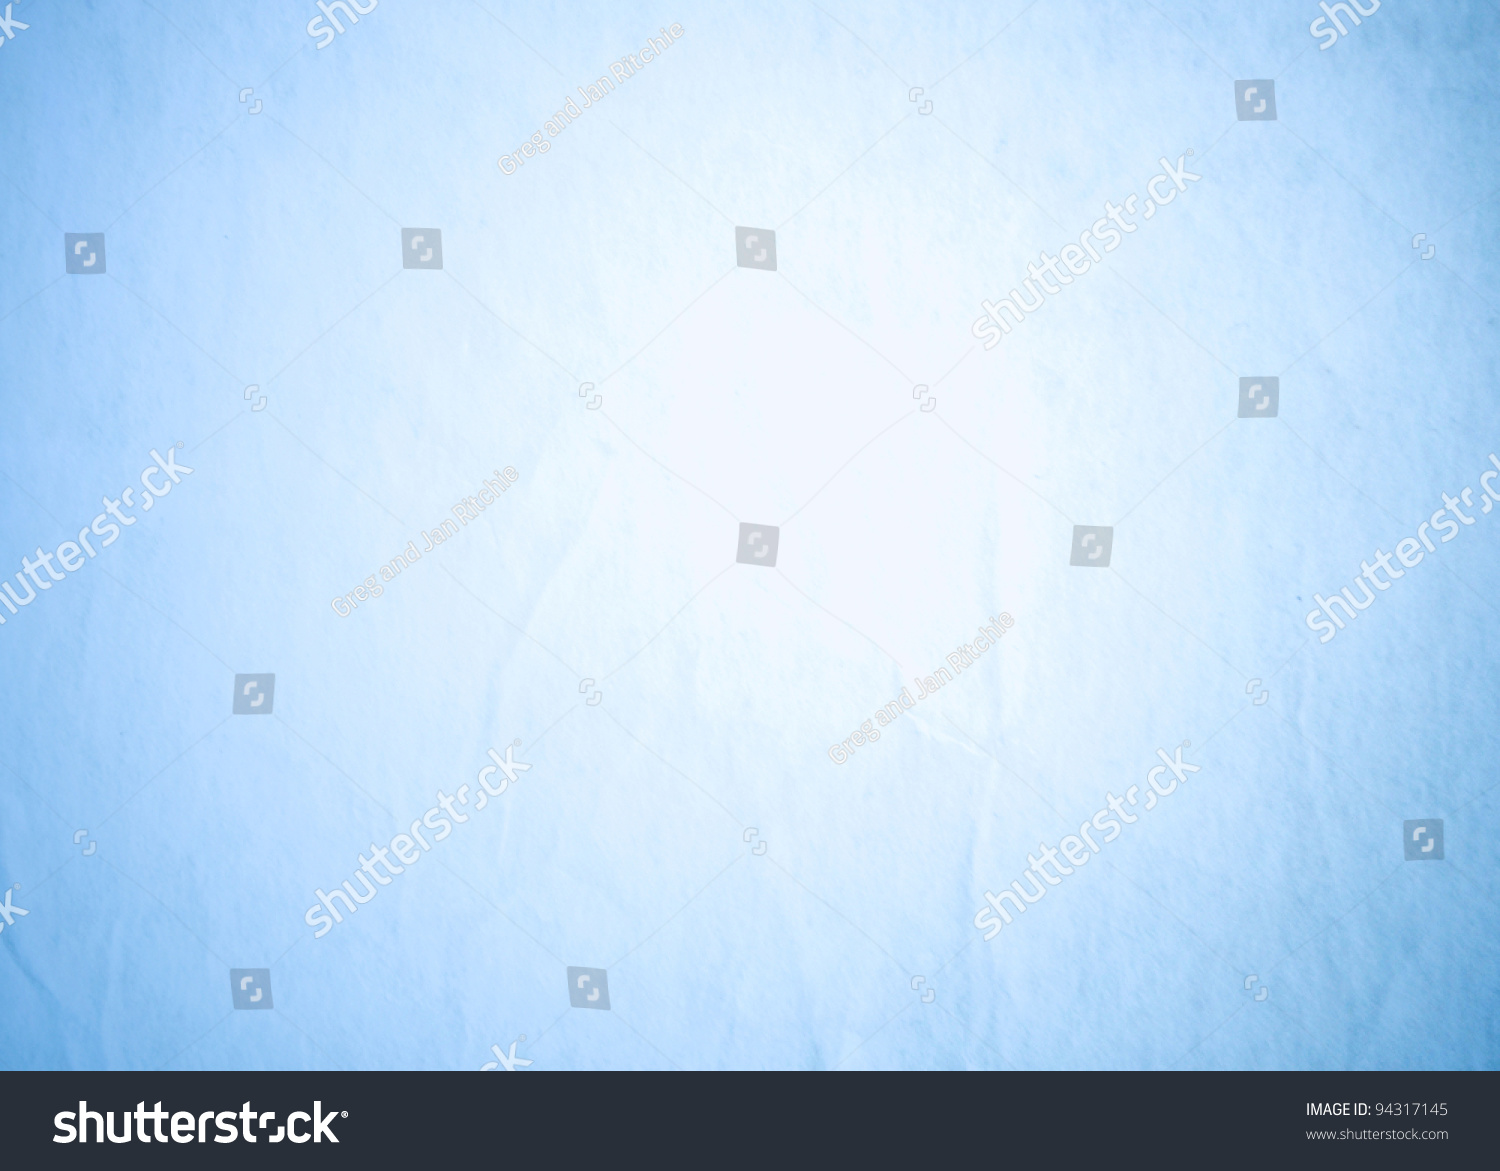 Faded Blue Background Stock Photo 94317145 - Shutterstock